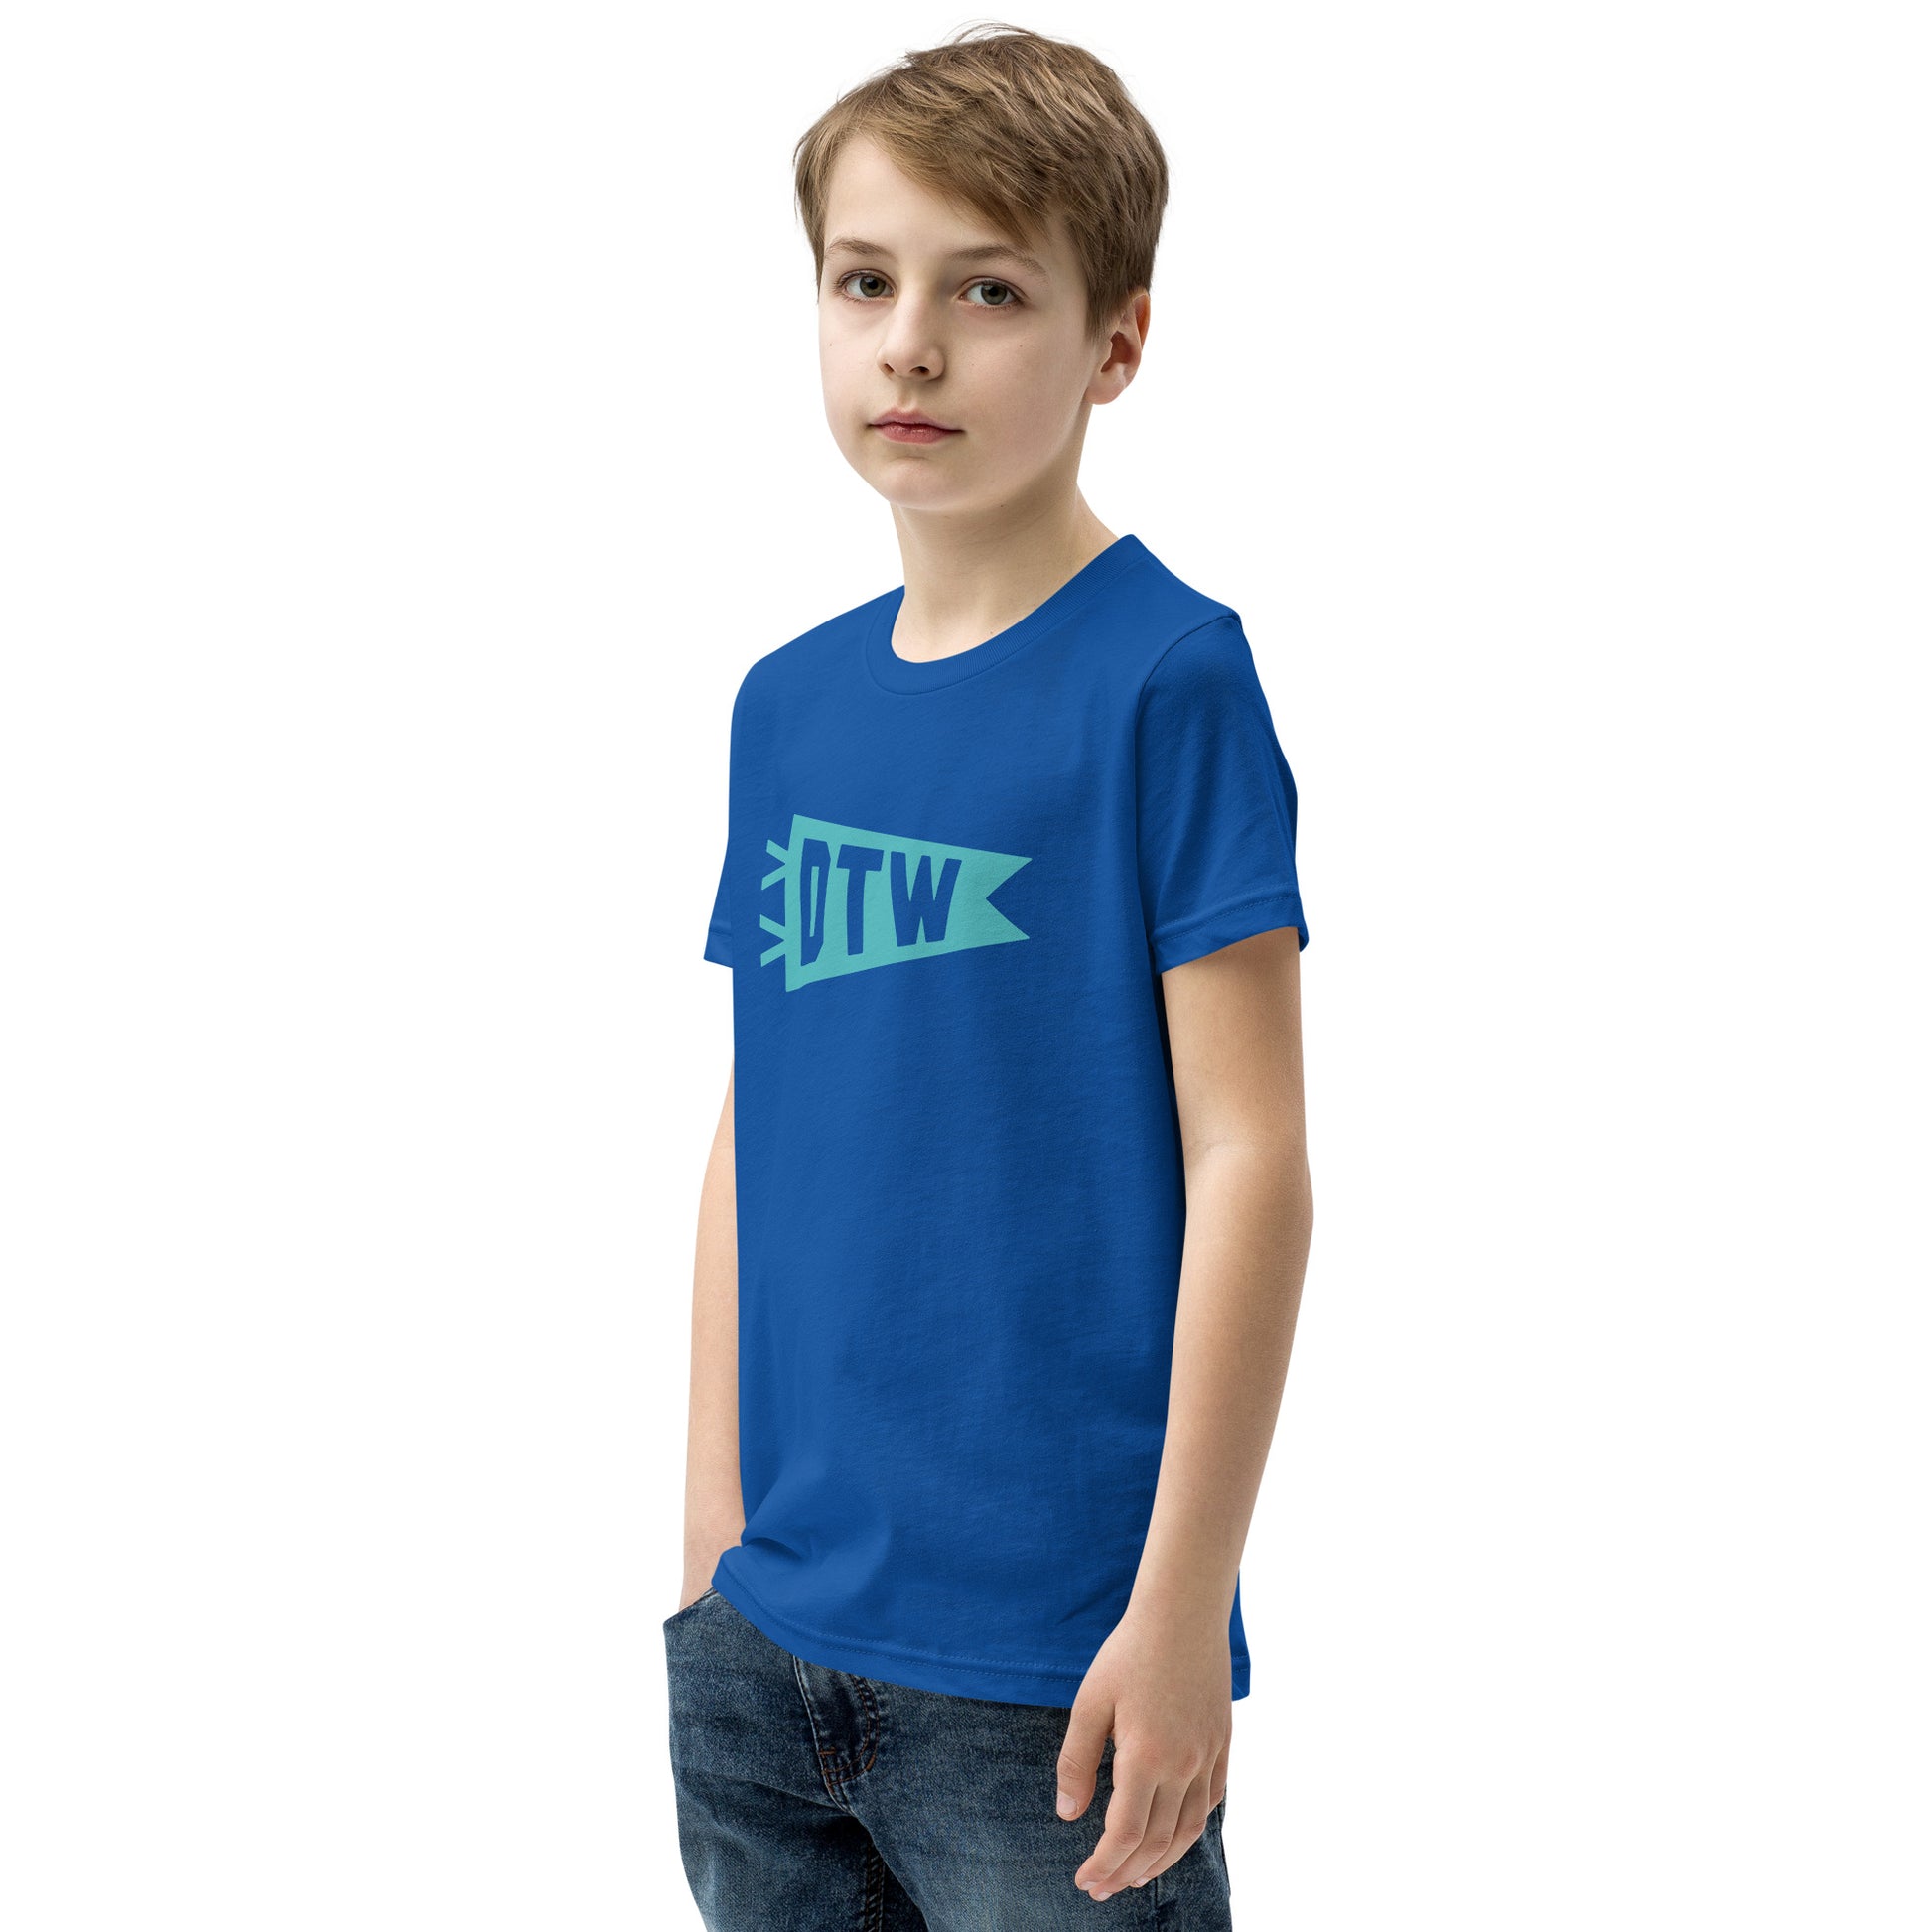 Kid's Airport Code Tee - Viking Blue Graphic • DTW Detroit • YHM Designs - Image 06